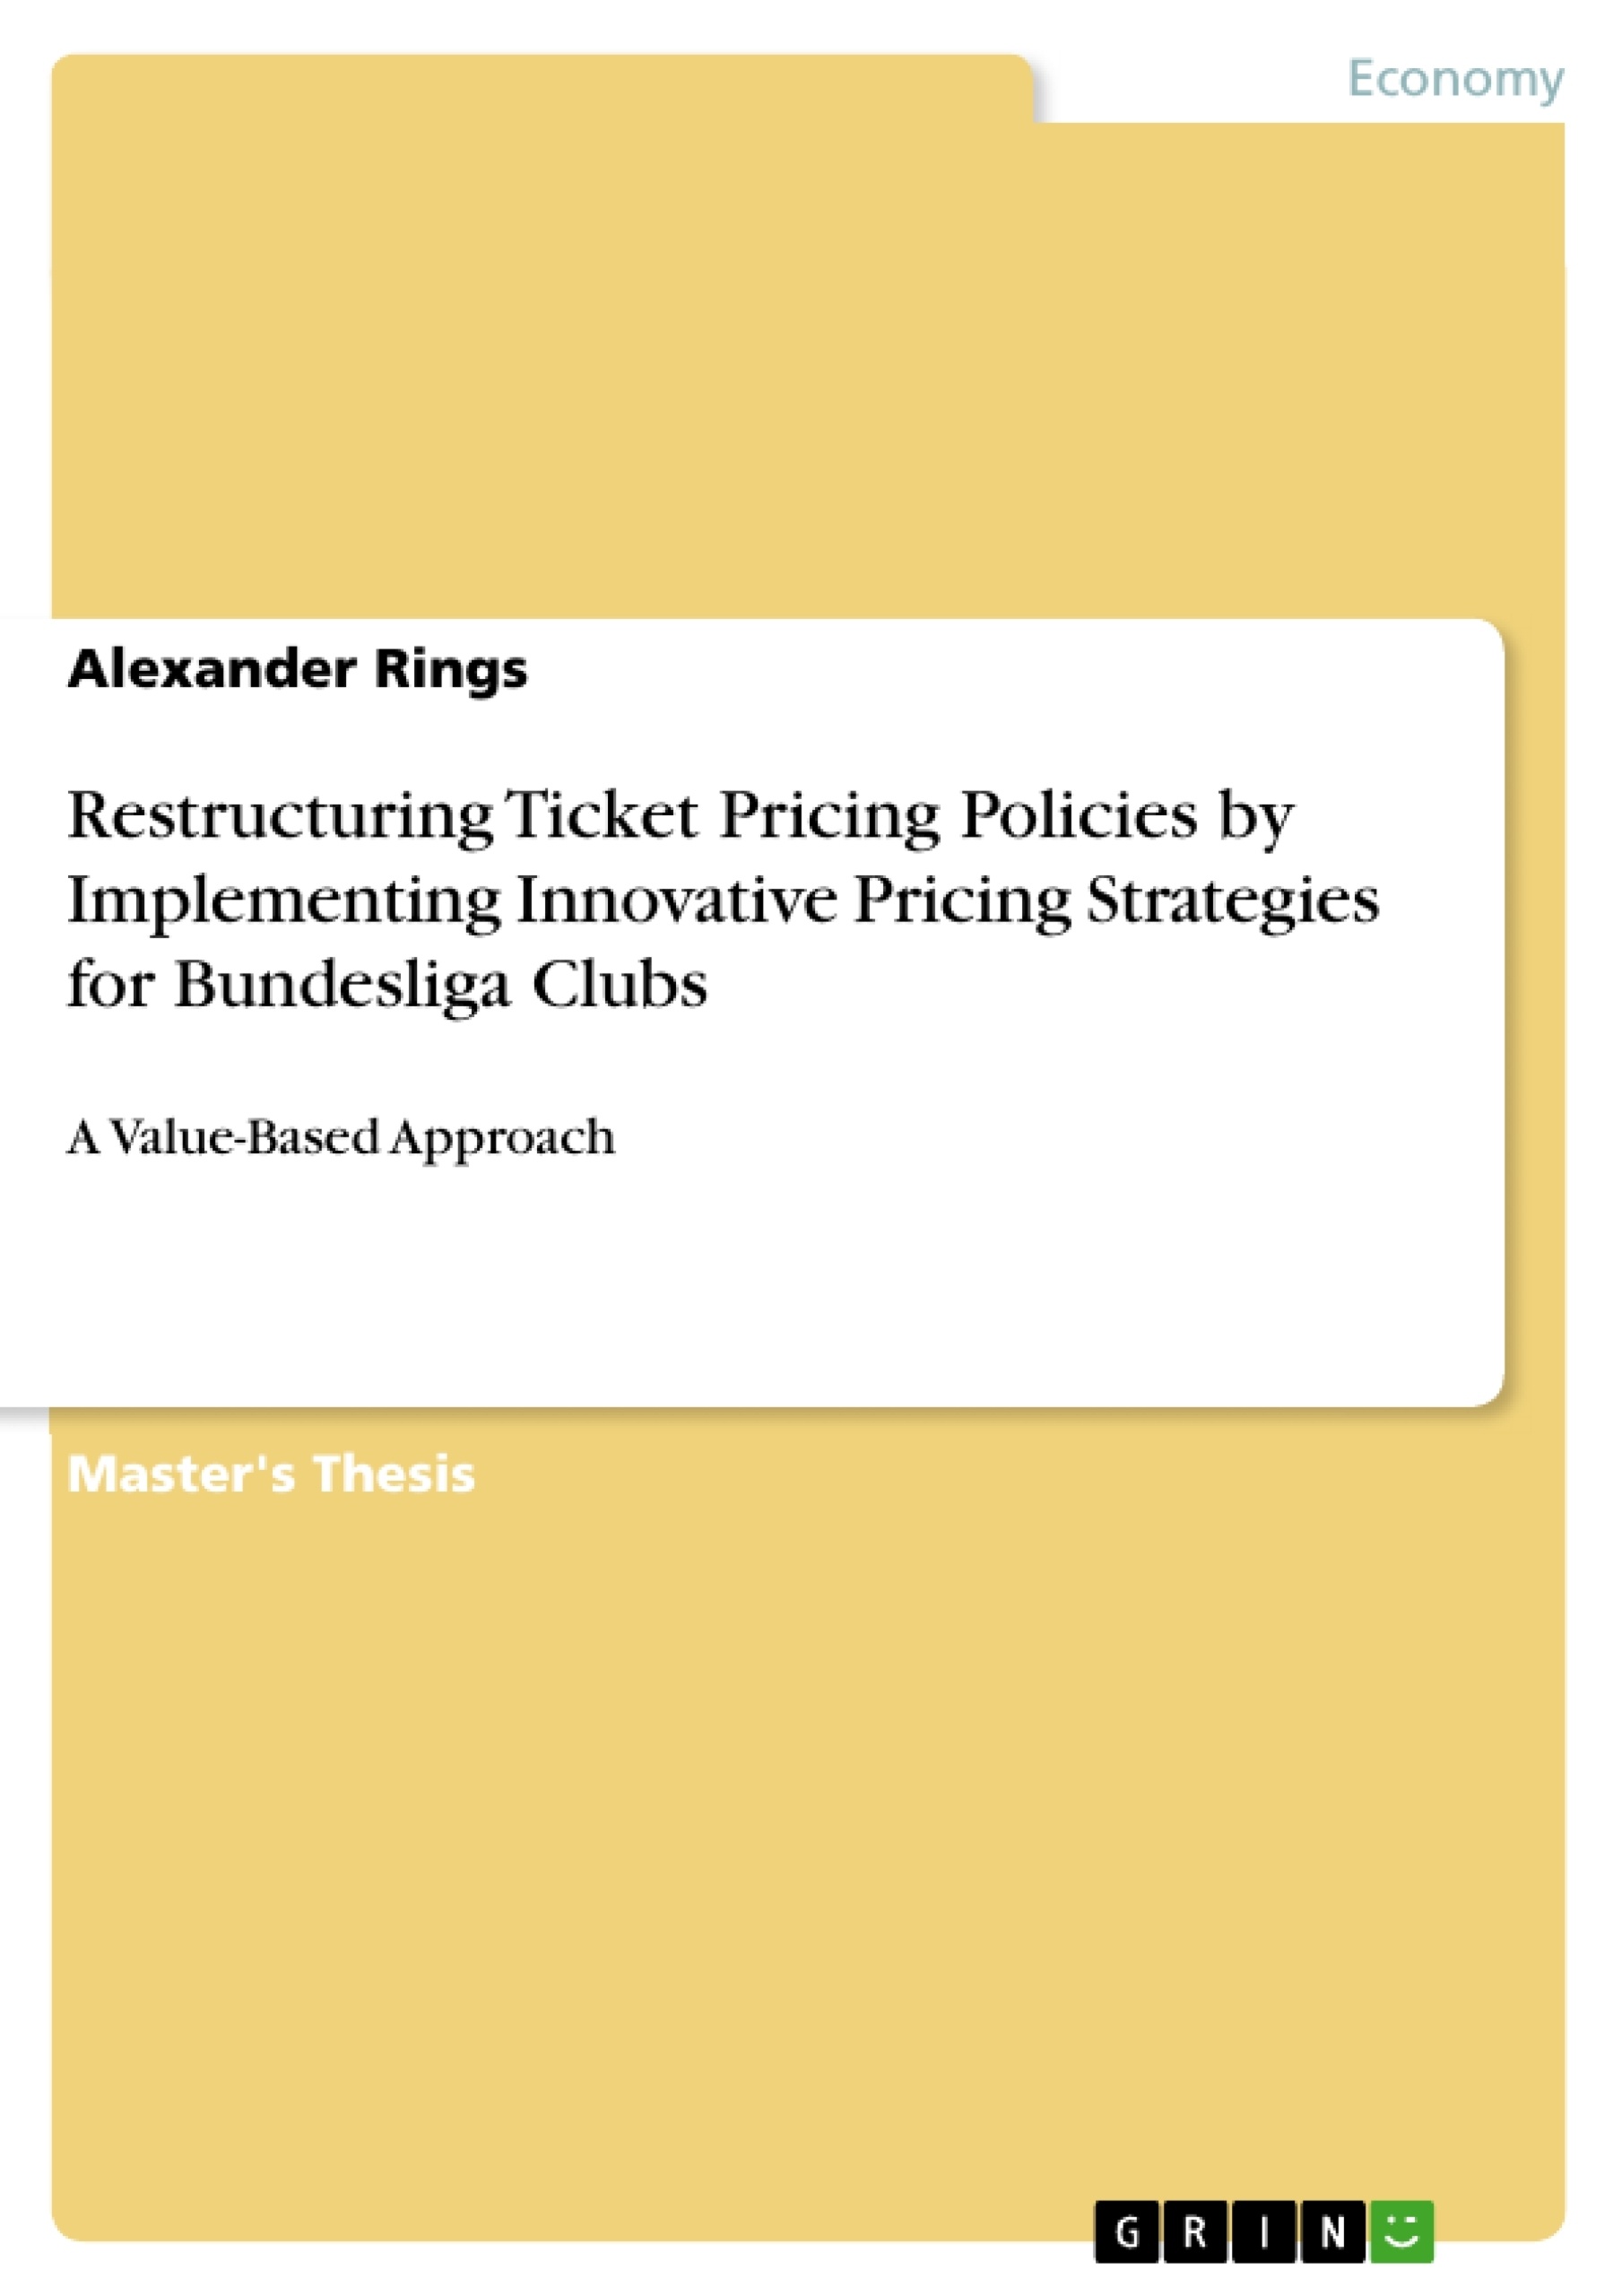 Title: Restructuring Ticket Pricing Policies by Implementing Innovative Pricing Strategies for Bundesliga Clubs